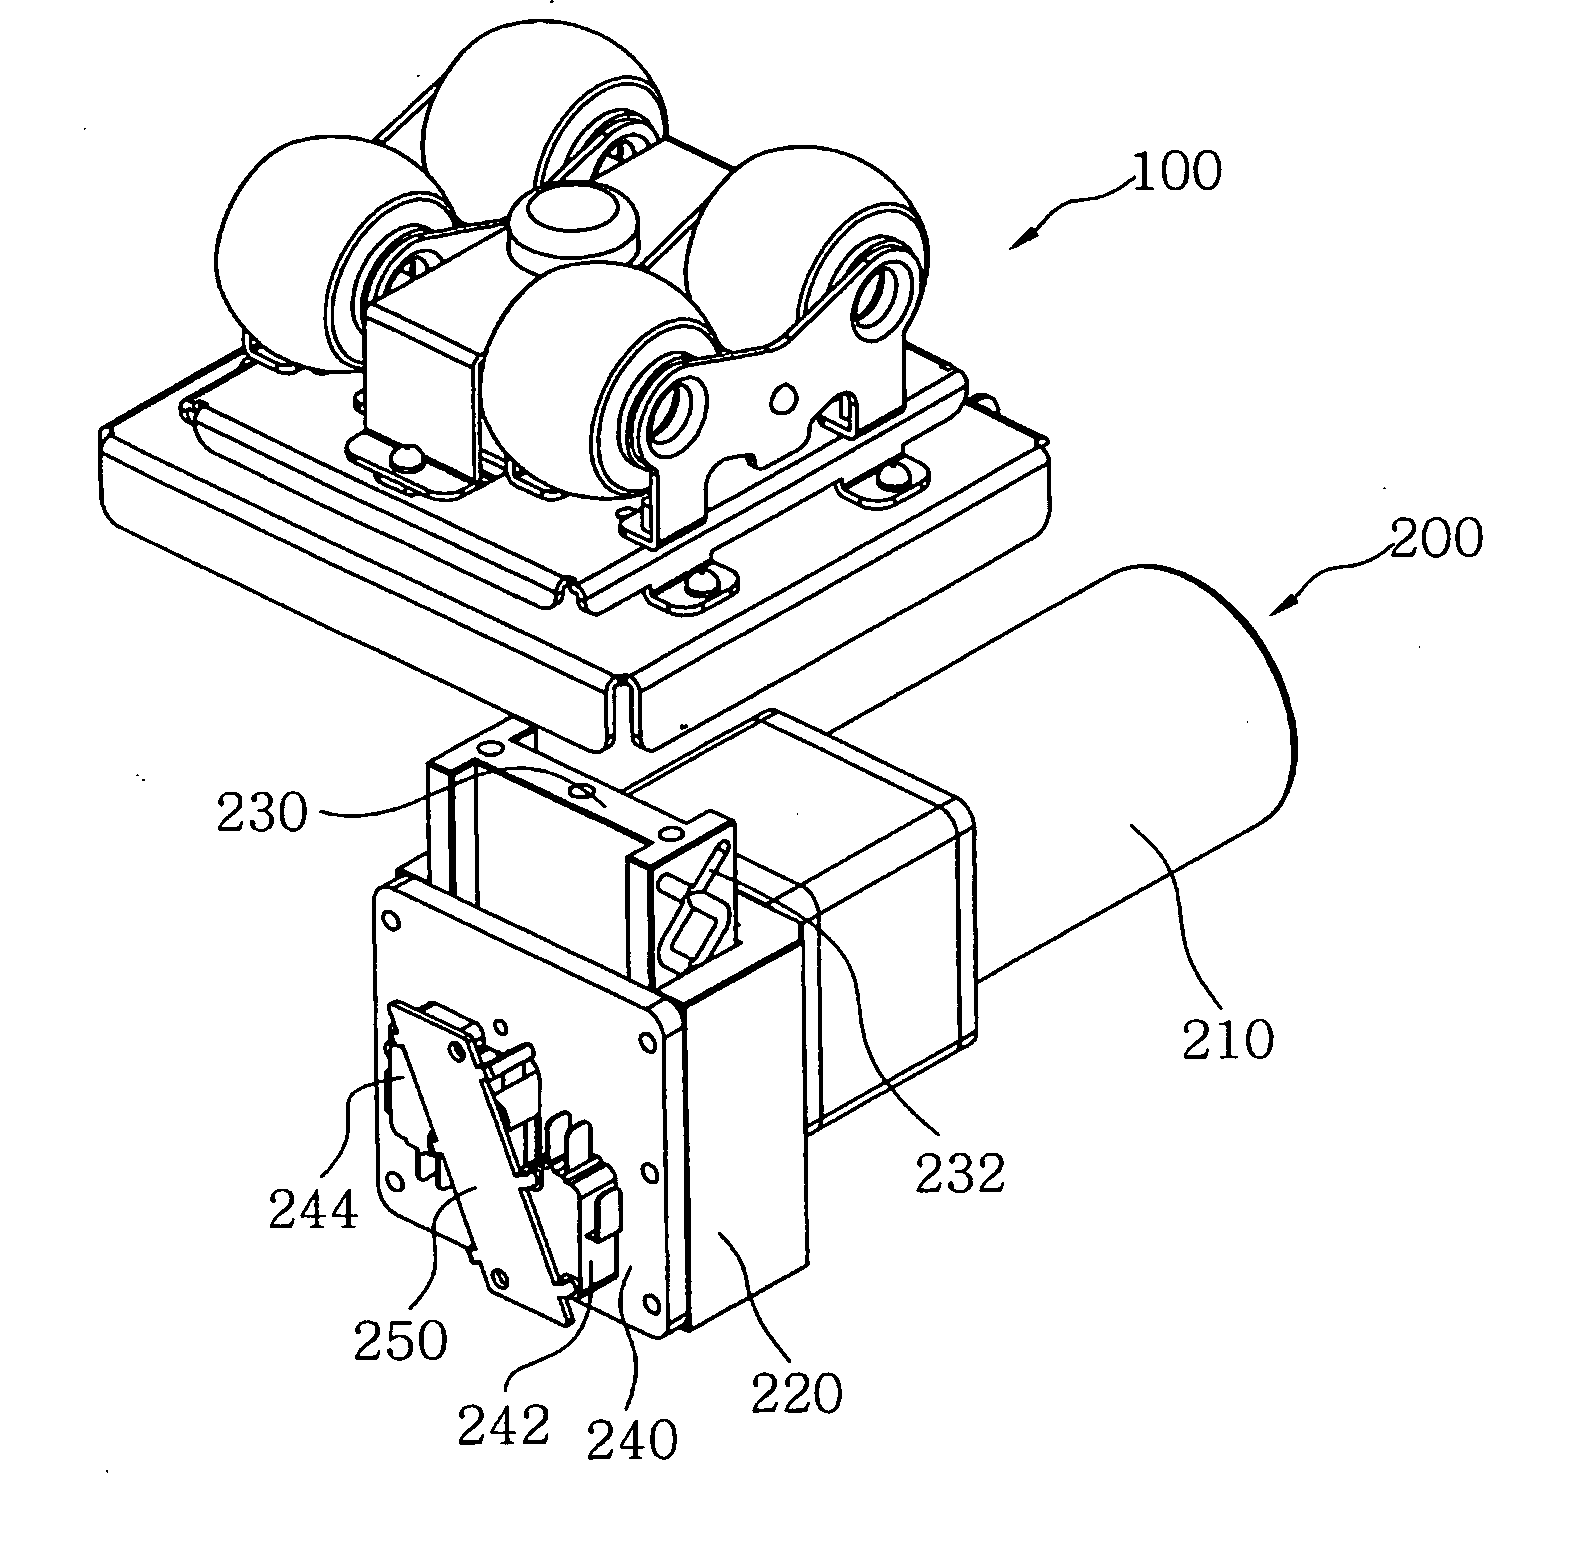 Thermoceramic lifter of thermotherapy apparatus